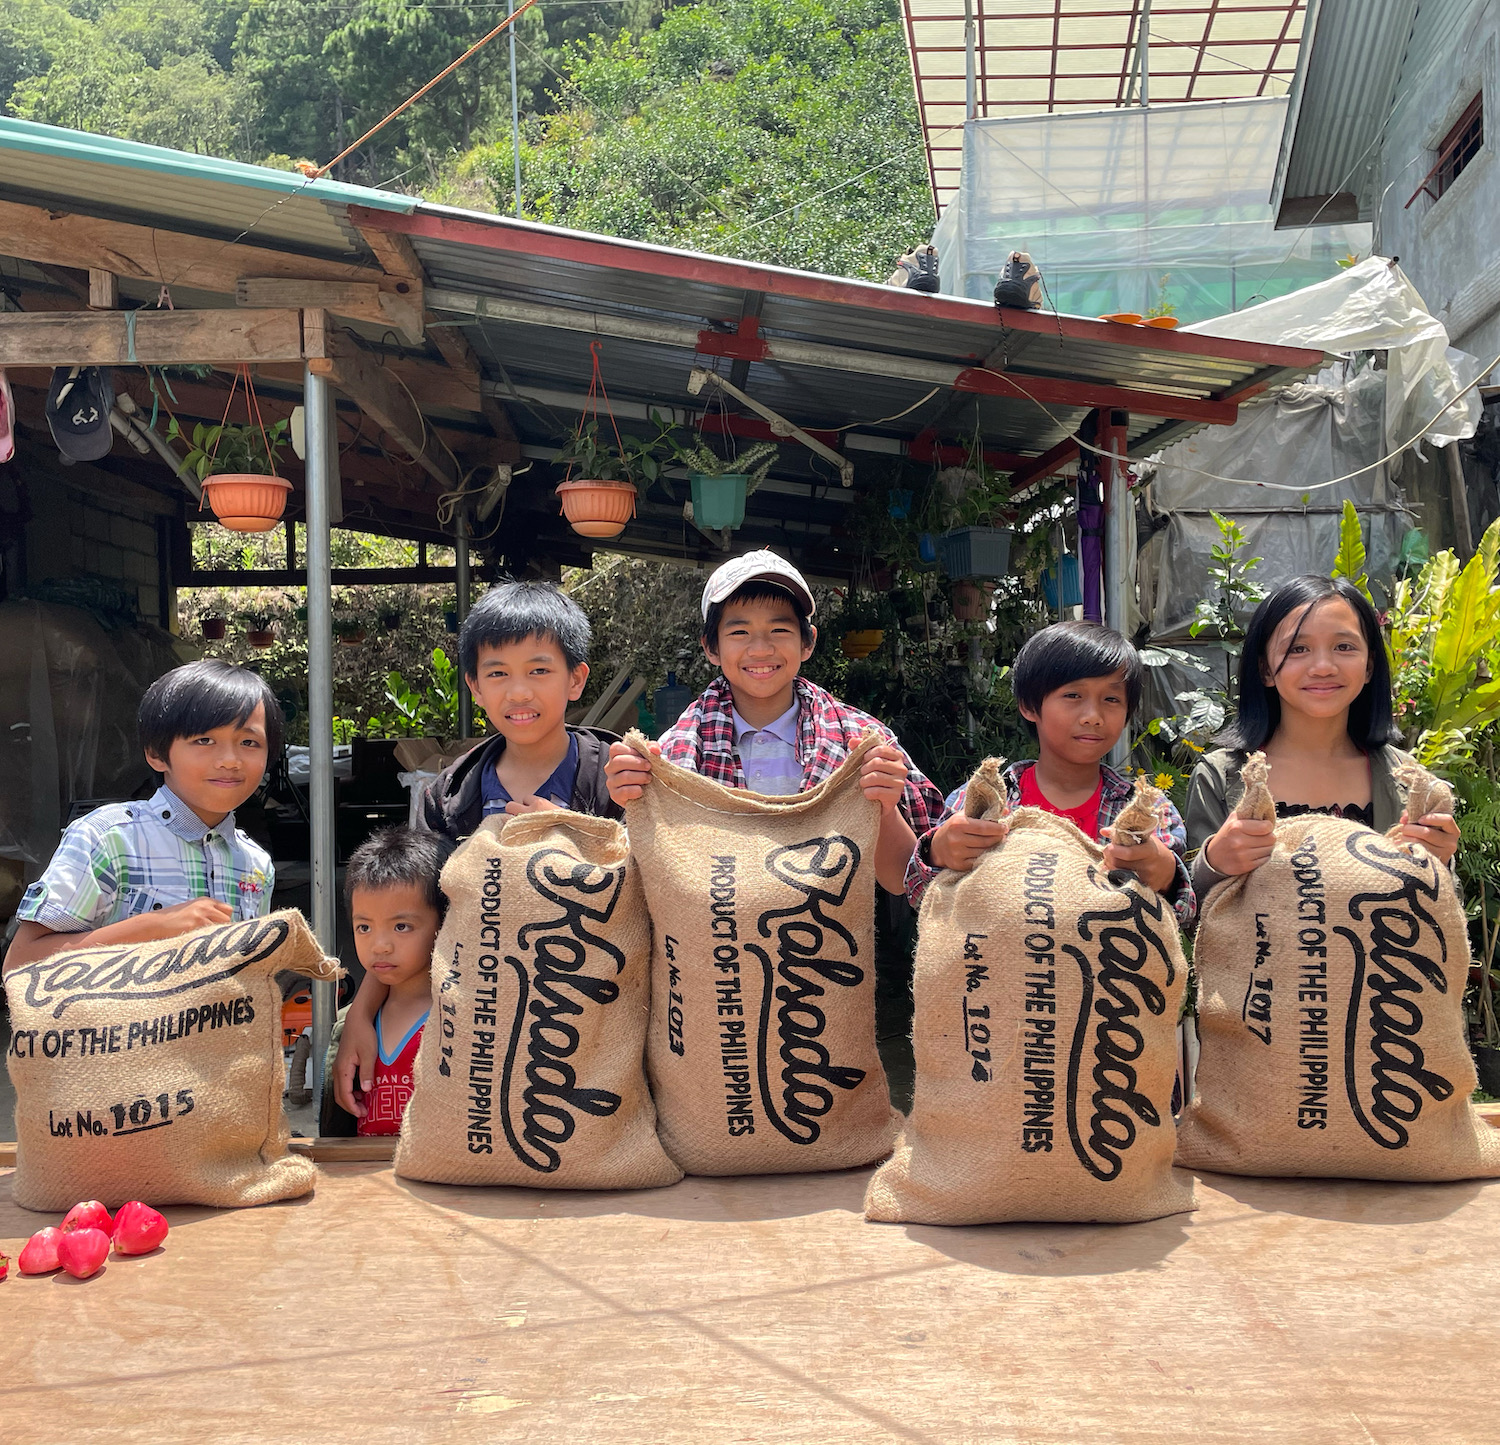 The children of the coffee farming community in Sitio Belis, holding up sacks of Kalsada beans